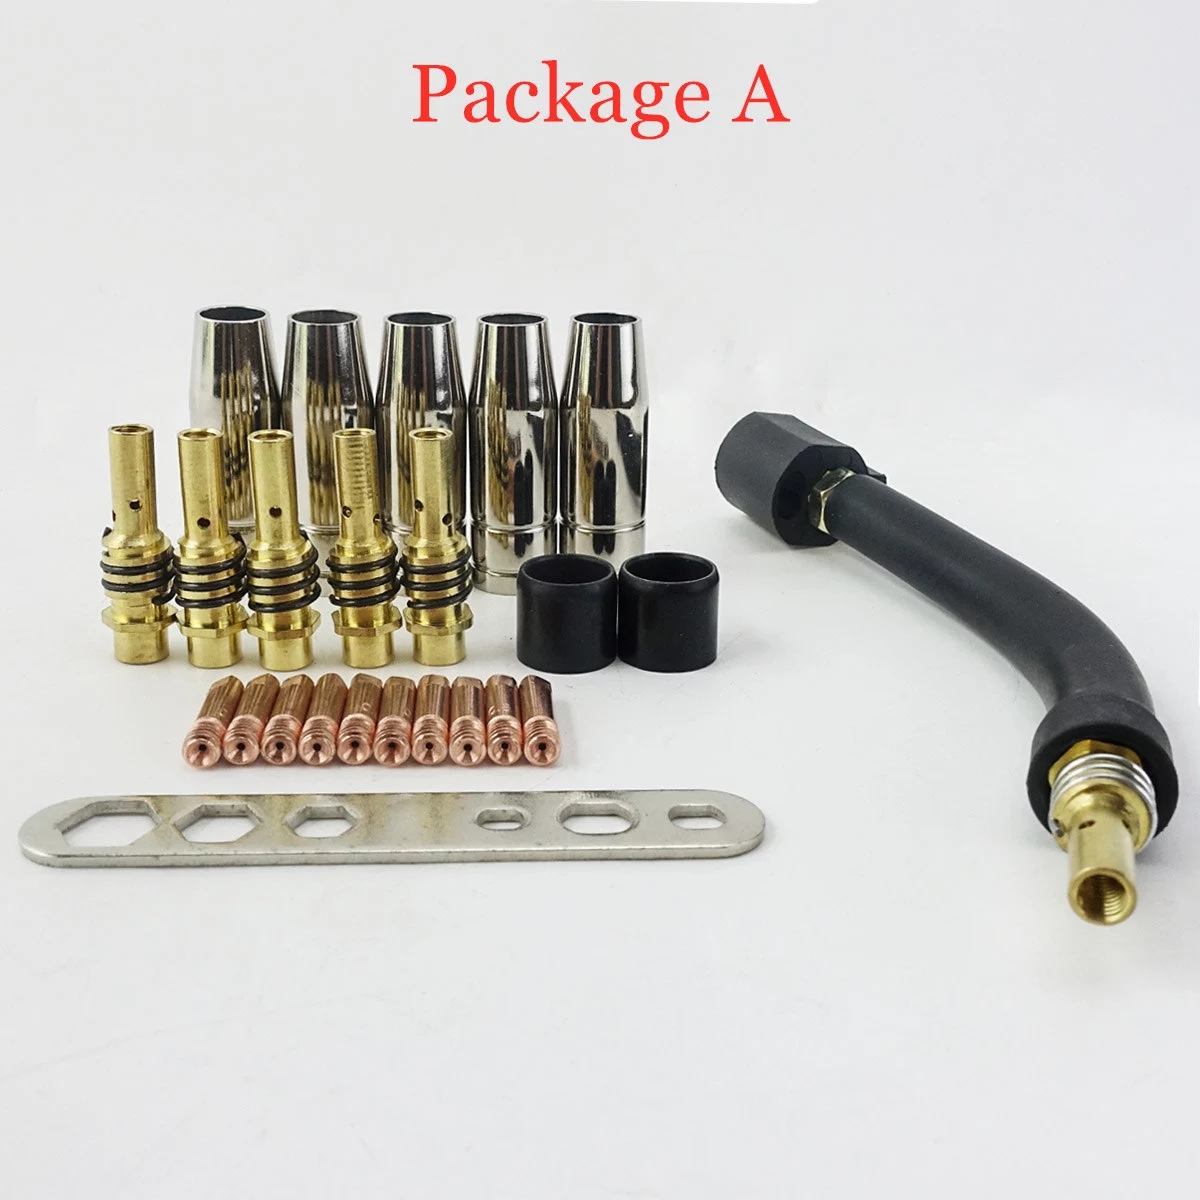 15AK-Welding-Torch-Consumables-eu-Style-180A-MIG-Torch-Nozzle-Gaas-Tips-Guun-Holder-Wrench-Neck-for--1853392-2